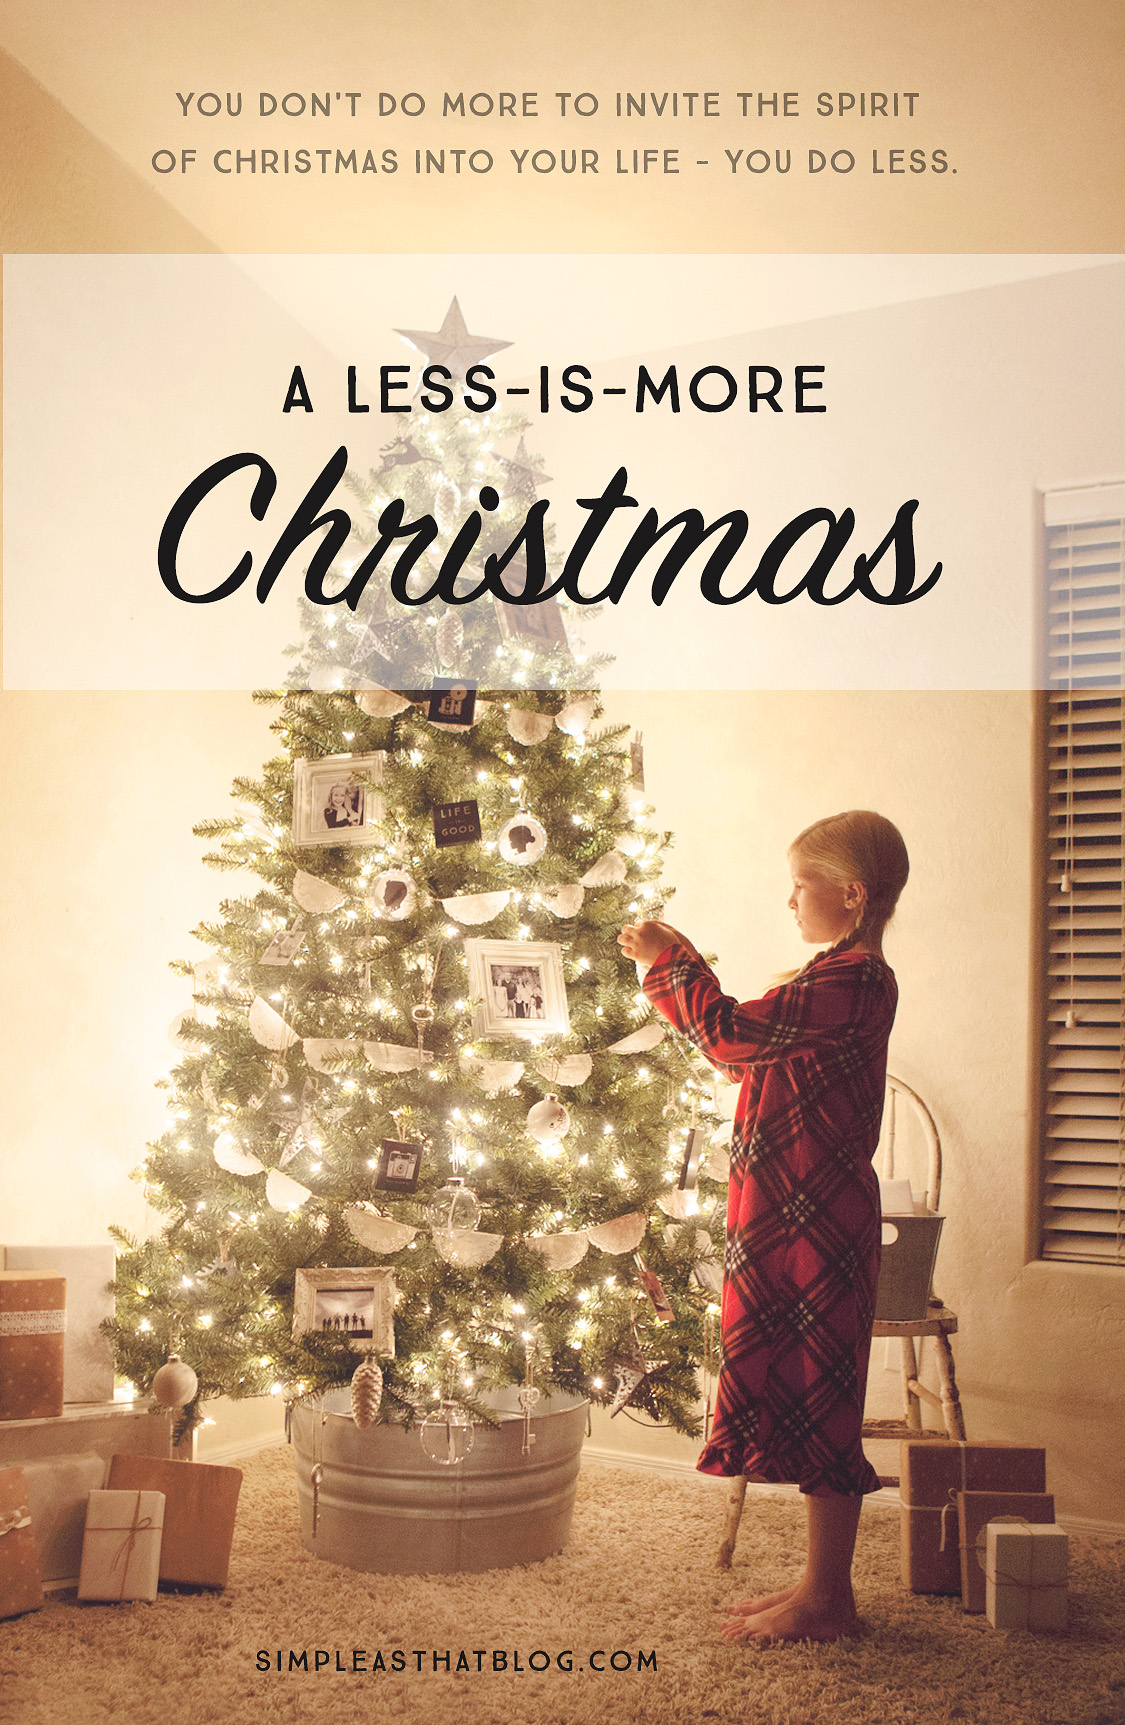 Although it’s counterintuitive to do *less* at this time of year, doing less leaves more room for family, simple traditions, and the true spirit of Christmas.